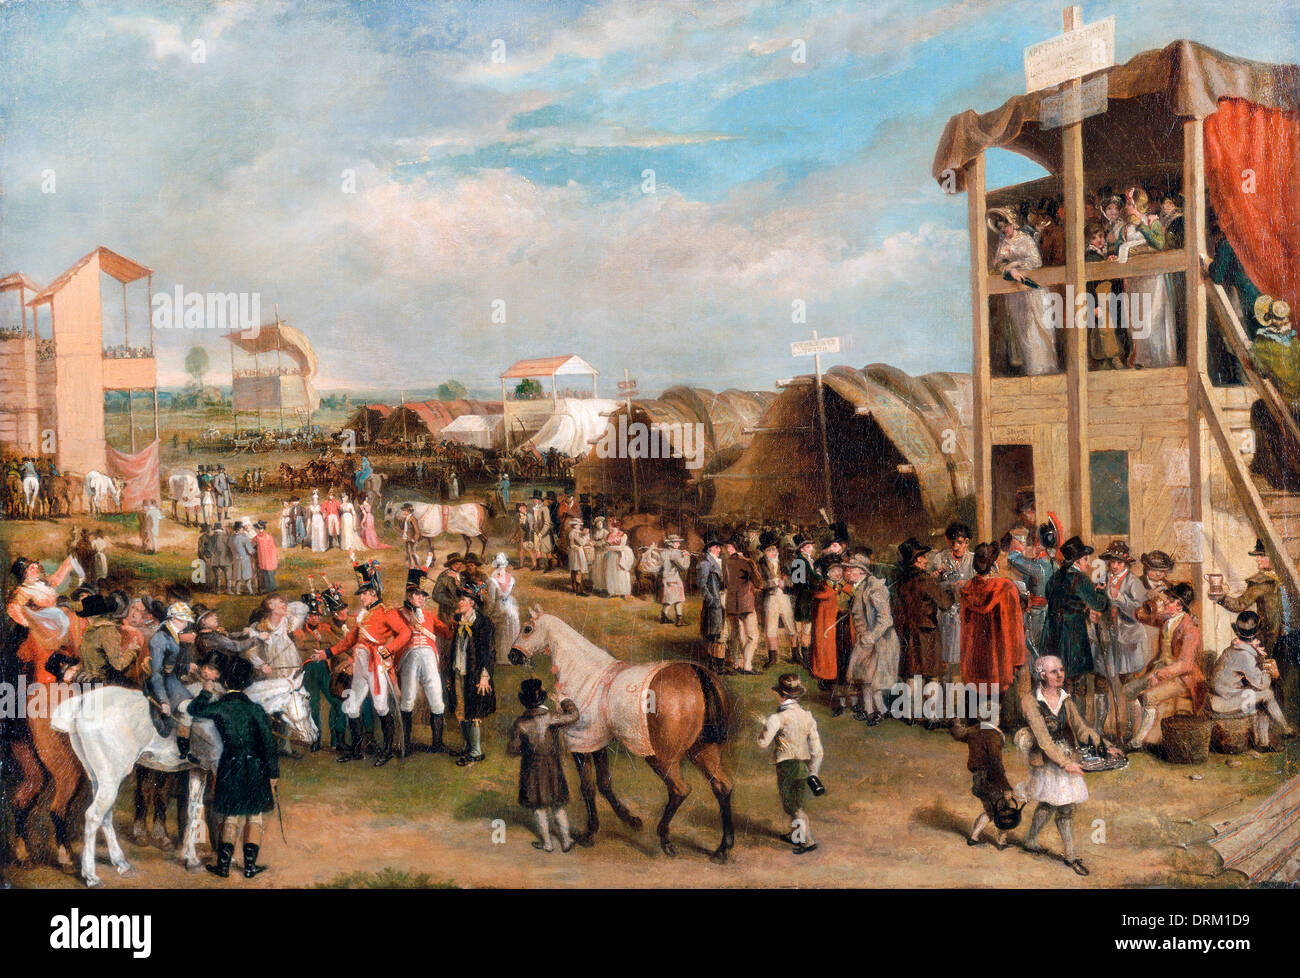 Charles Turner, An Extensive View of the Oxford Races. Circa 1820. Oil on canvas. Yale Center for British Art, New Haven, USA. Stock Photo